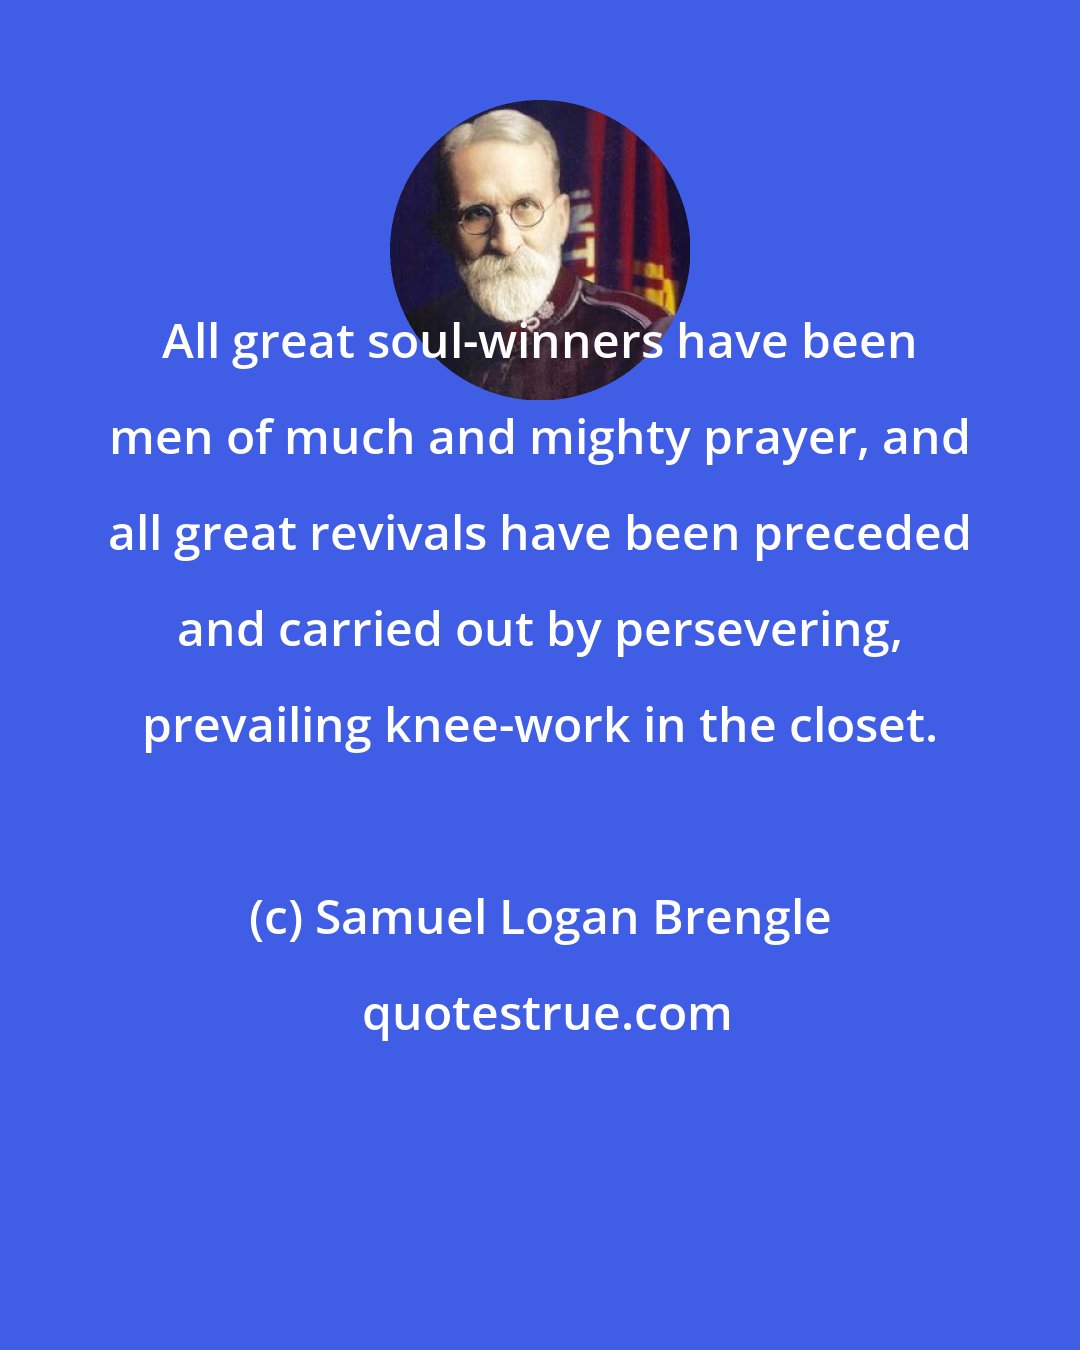 Samuel Logan Brengle: All great soul-winners have been men of much and mighty prayer, and all great revivals have been preceded and carried out by persevering, prevailing knee-work in the closet.